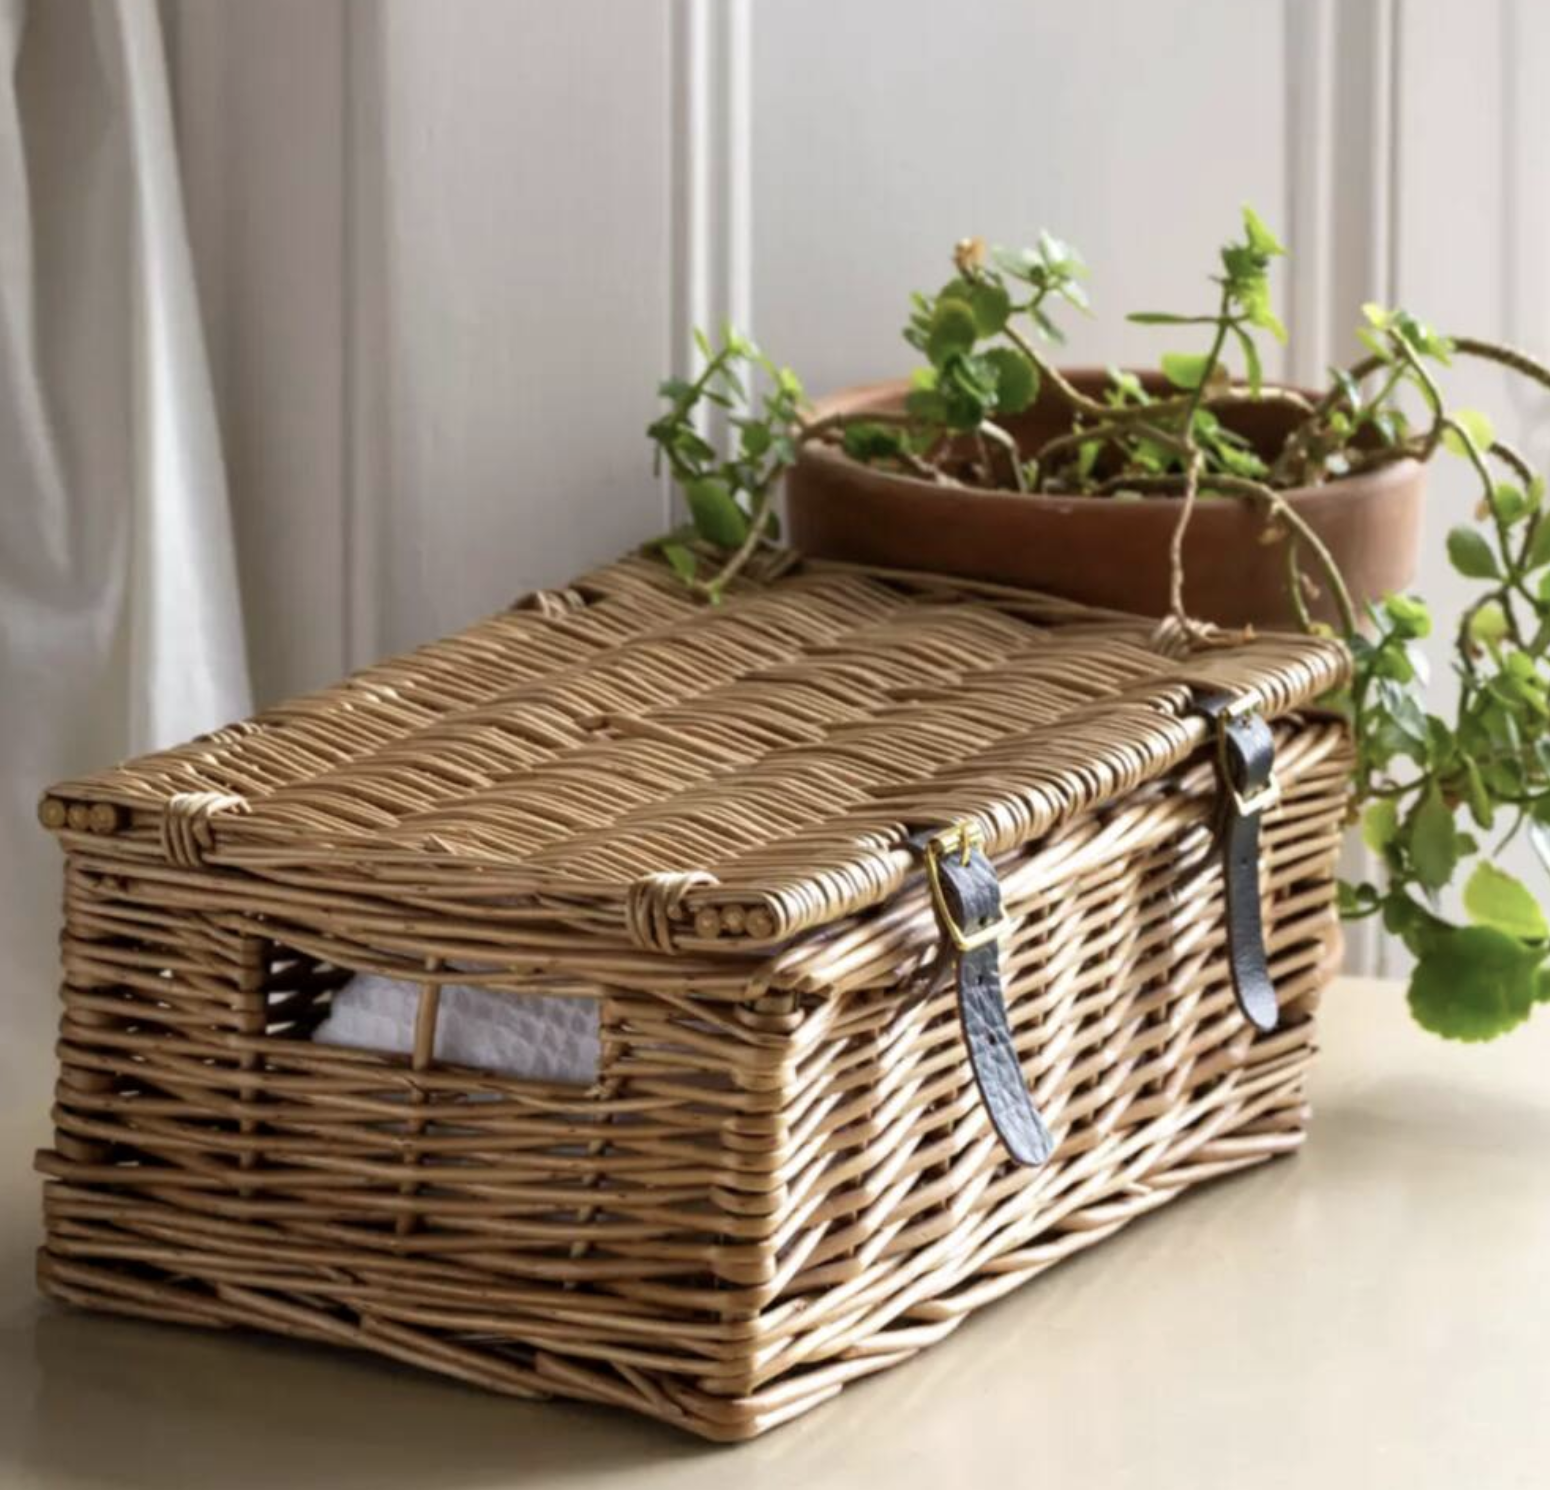 Grand Illusions Traditional Lidded Wicker Basket With Leather Straps